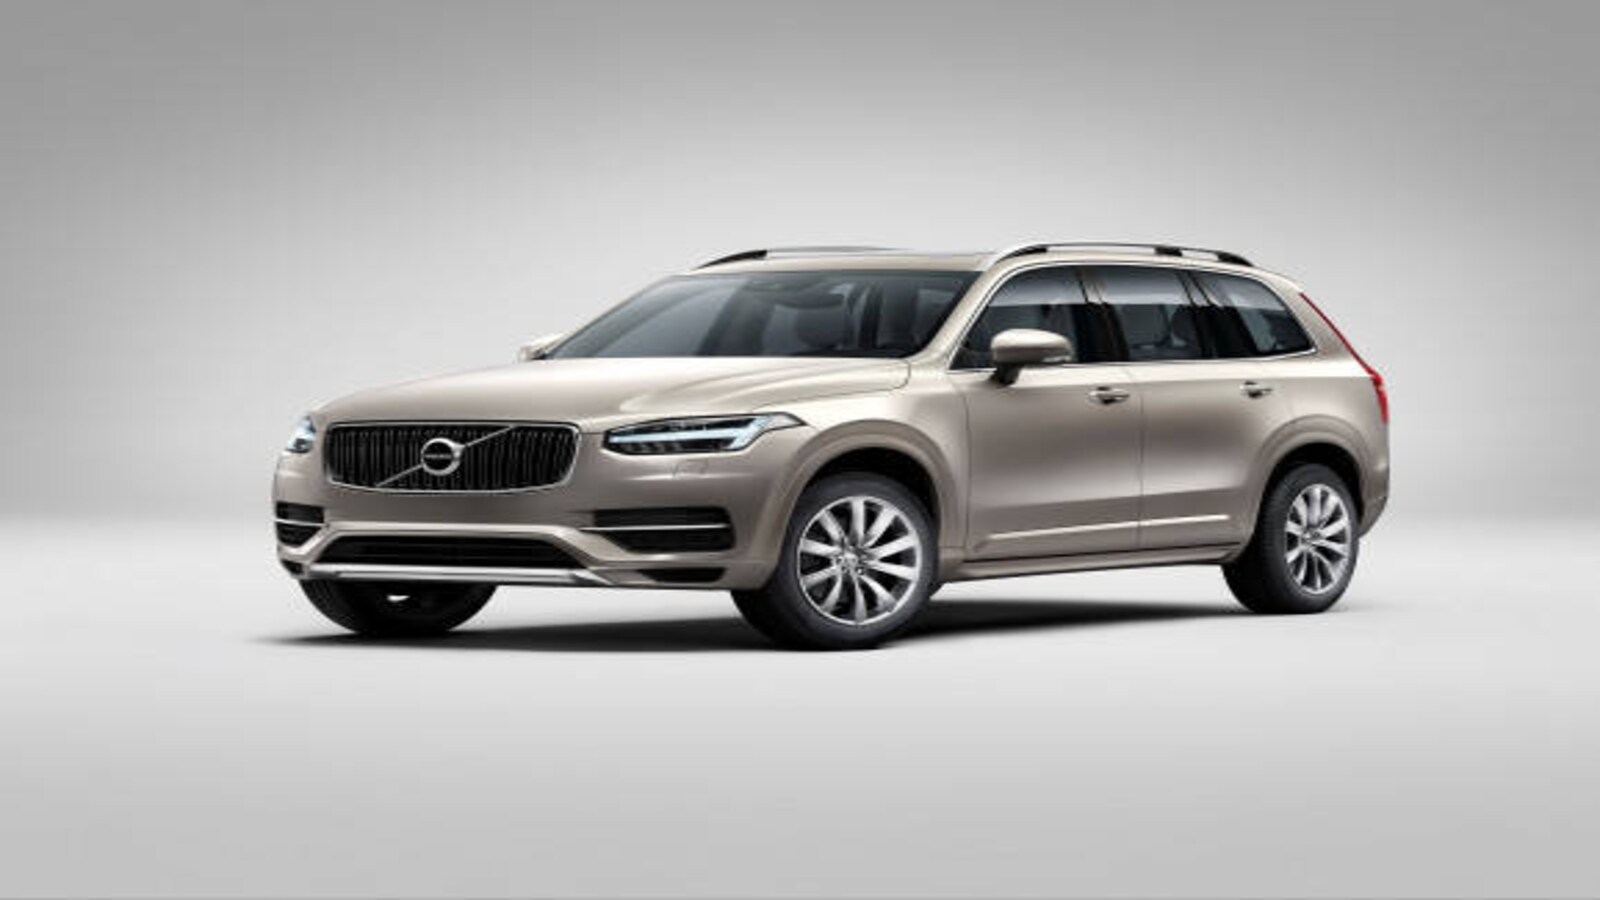 DLF Emporio, India's finest luxury retail destination - Effortless  performance. Bold design. Intuitive technology. Get the first look at  Volvo's all-new S60 and XC90 SUVs before they hit the market, only at